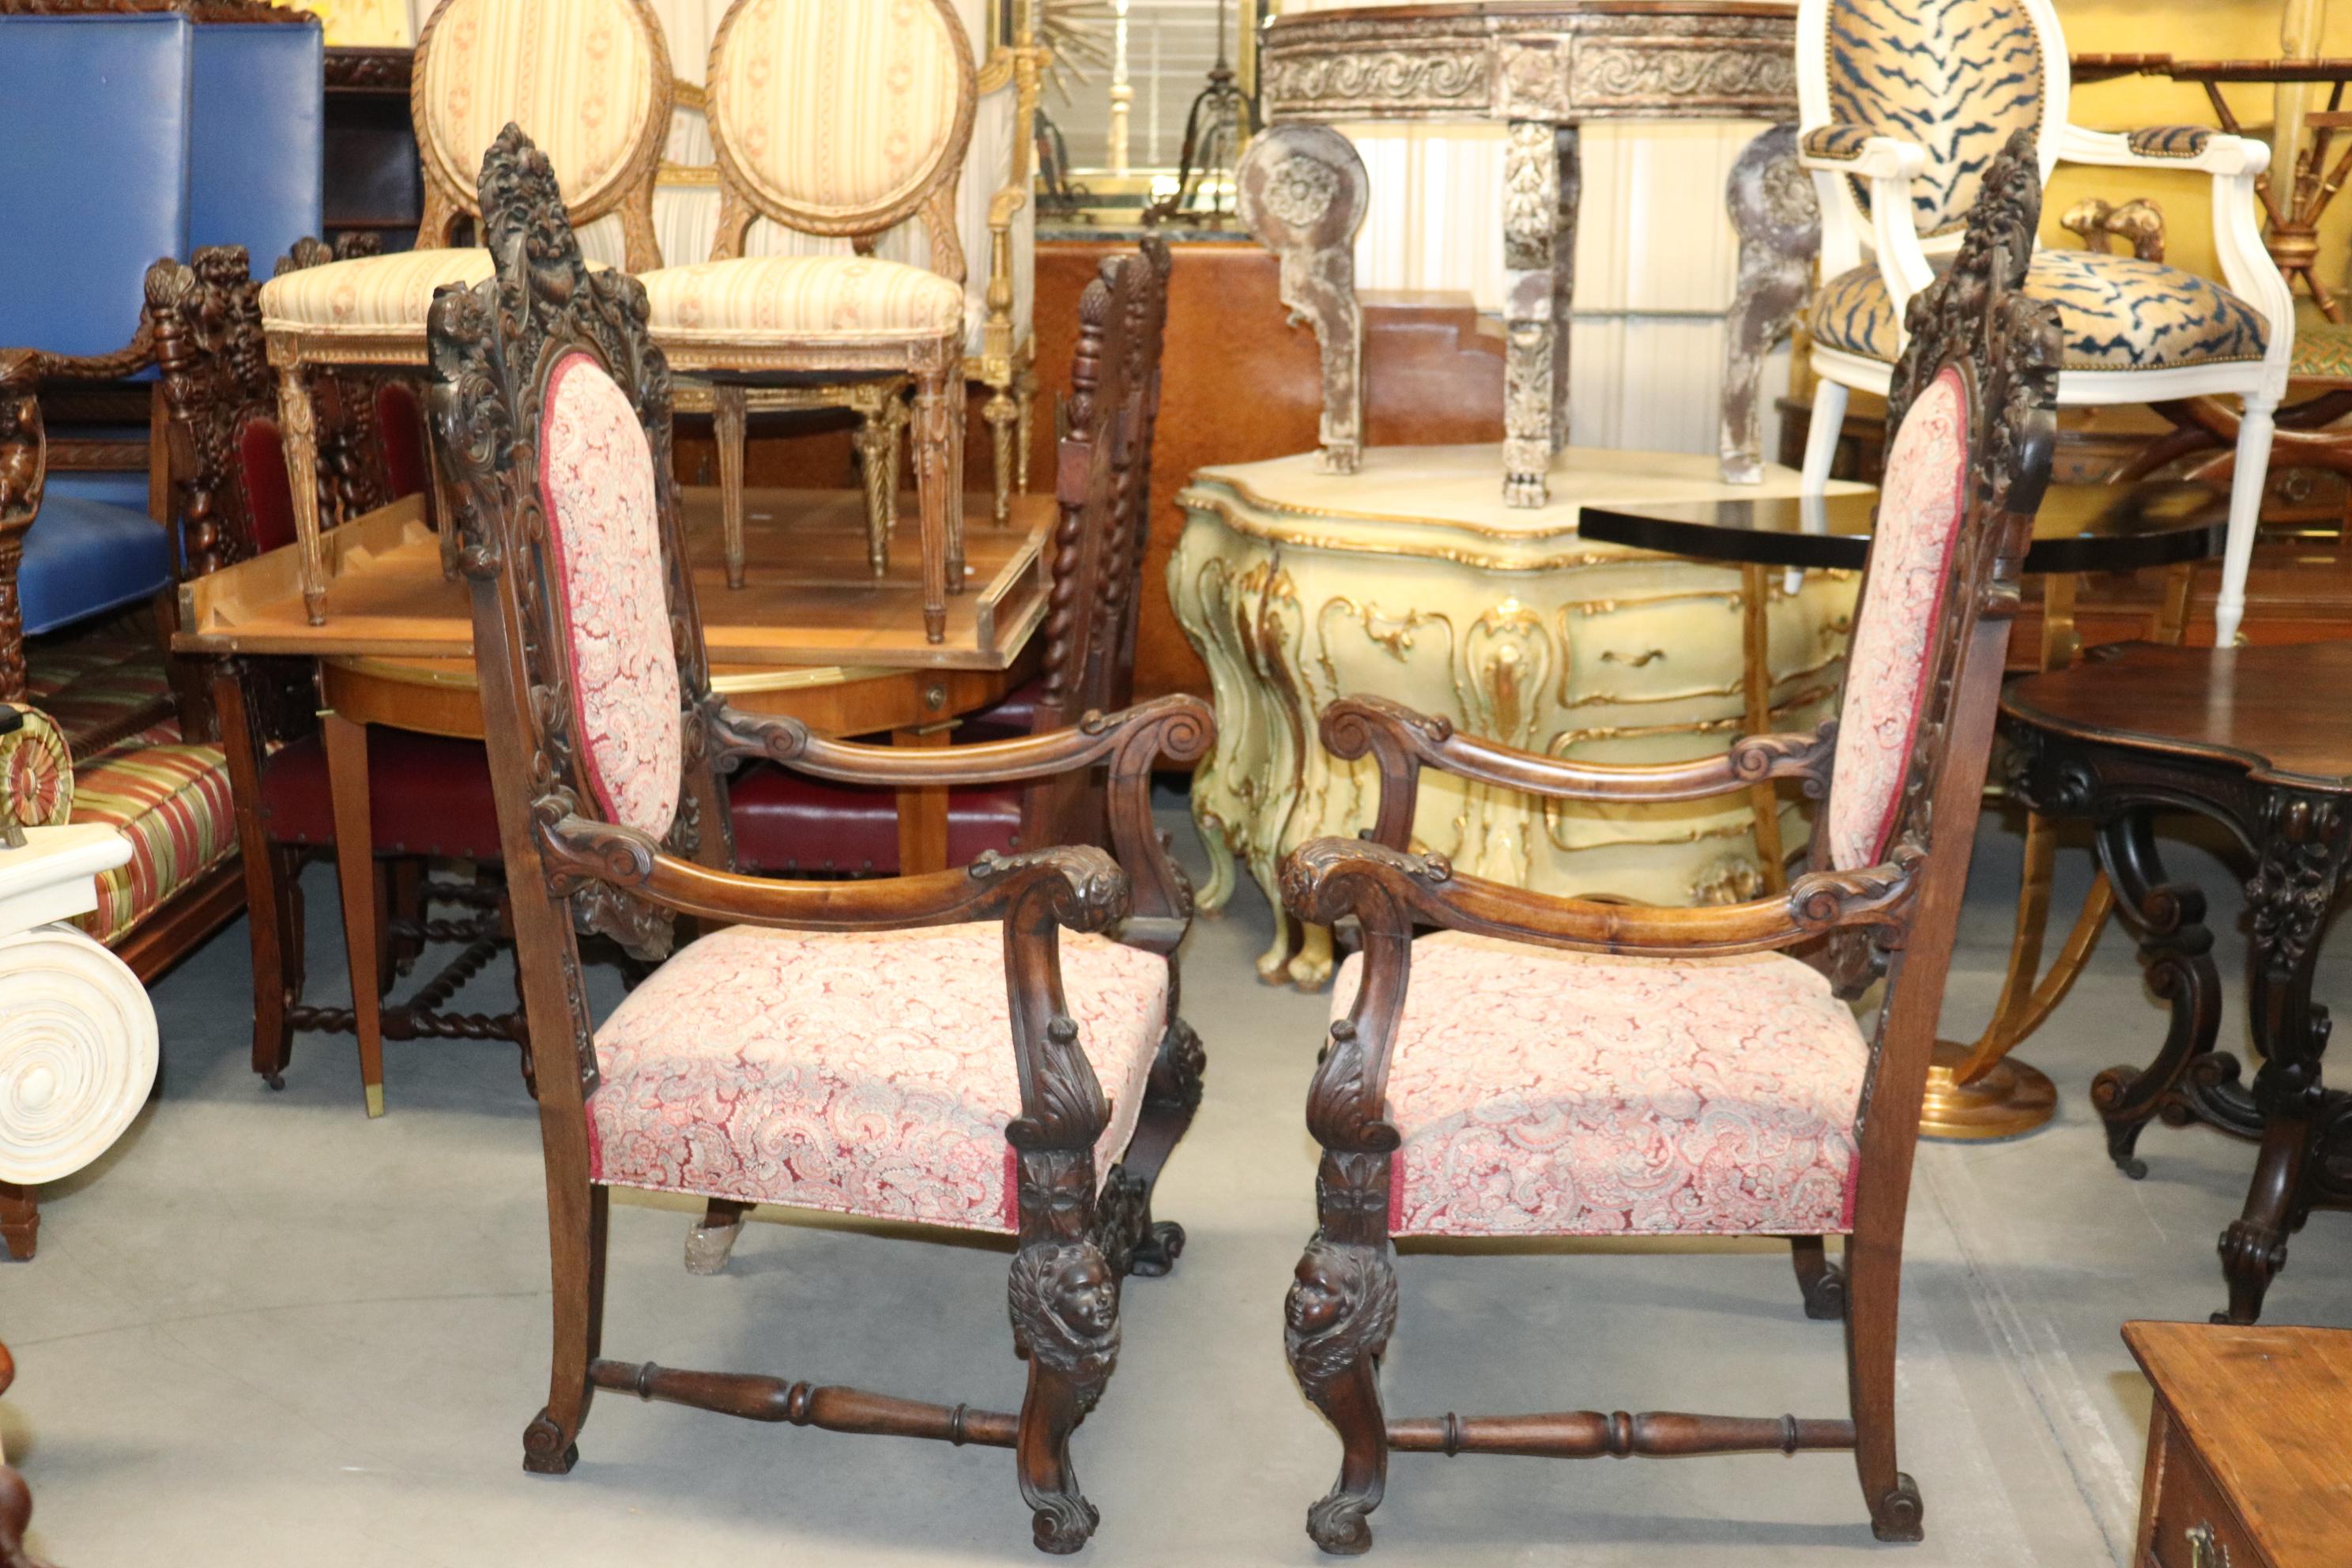 These chairs are crisply carved walnut and generously proportioned for larger people or just anyone who wants to be a king or queen in their castle. The chairs are upholstered in fashionable paisley and in very good condition. The chairs measure 57